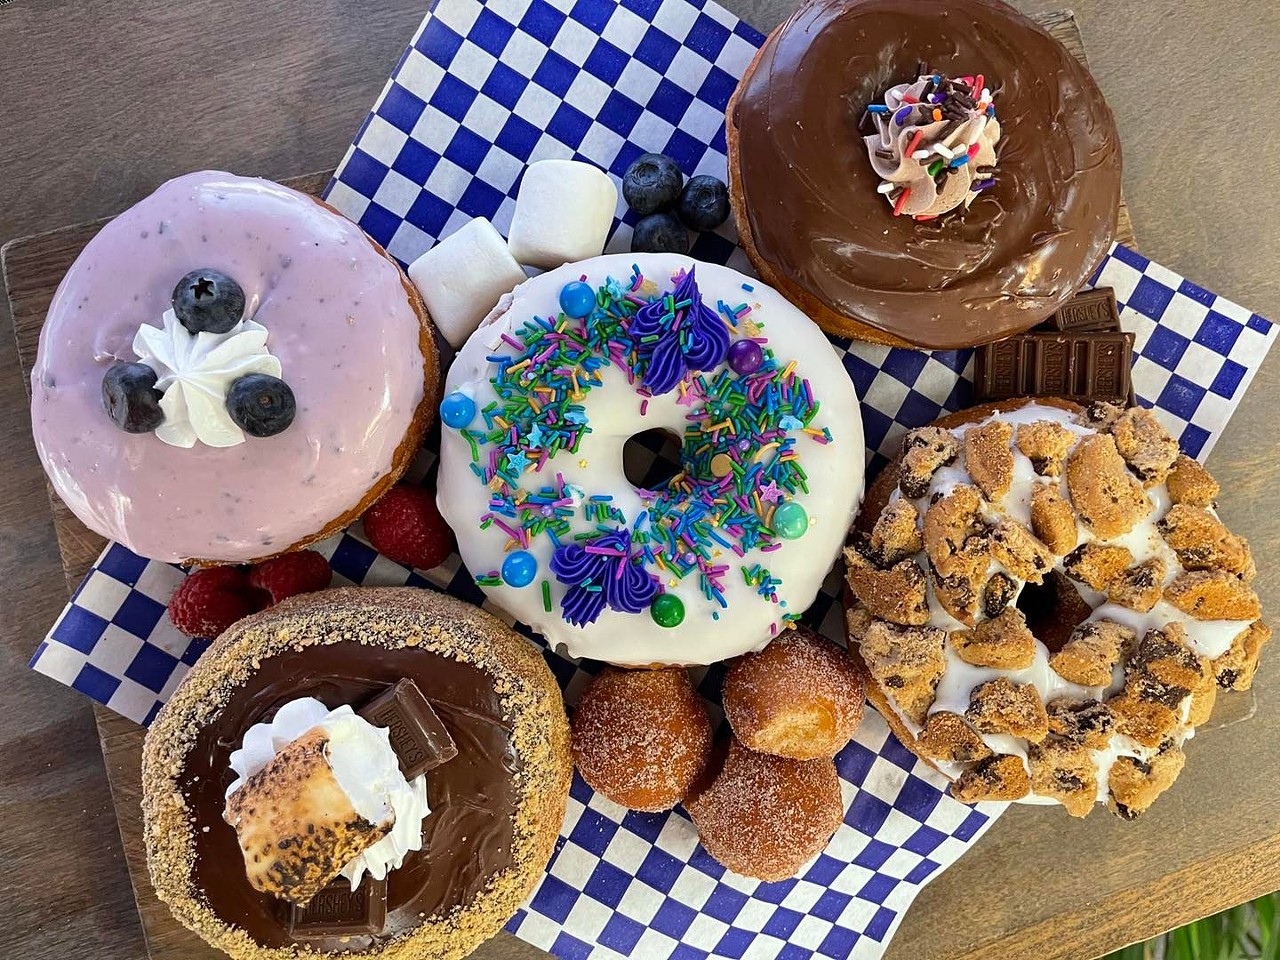 5. DG Doughnuts
16131 W Colonial Dr, Oakland, FL 34787
The best doughnuts you’ll drive by and not realize it.- u/vtfb79